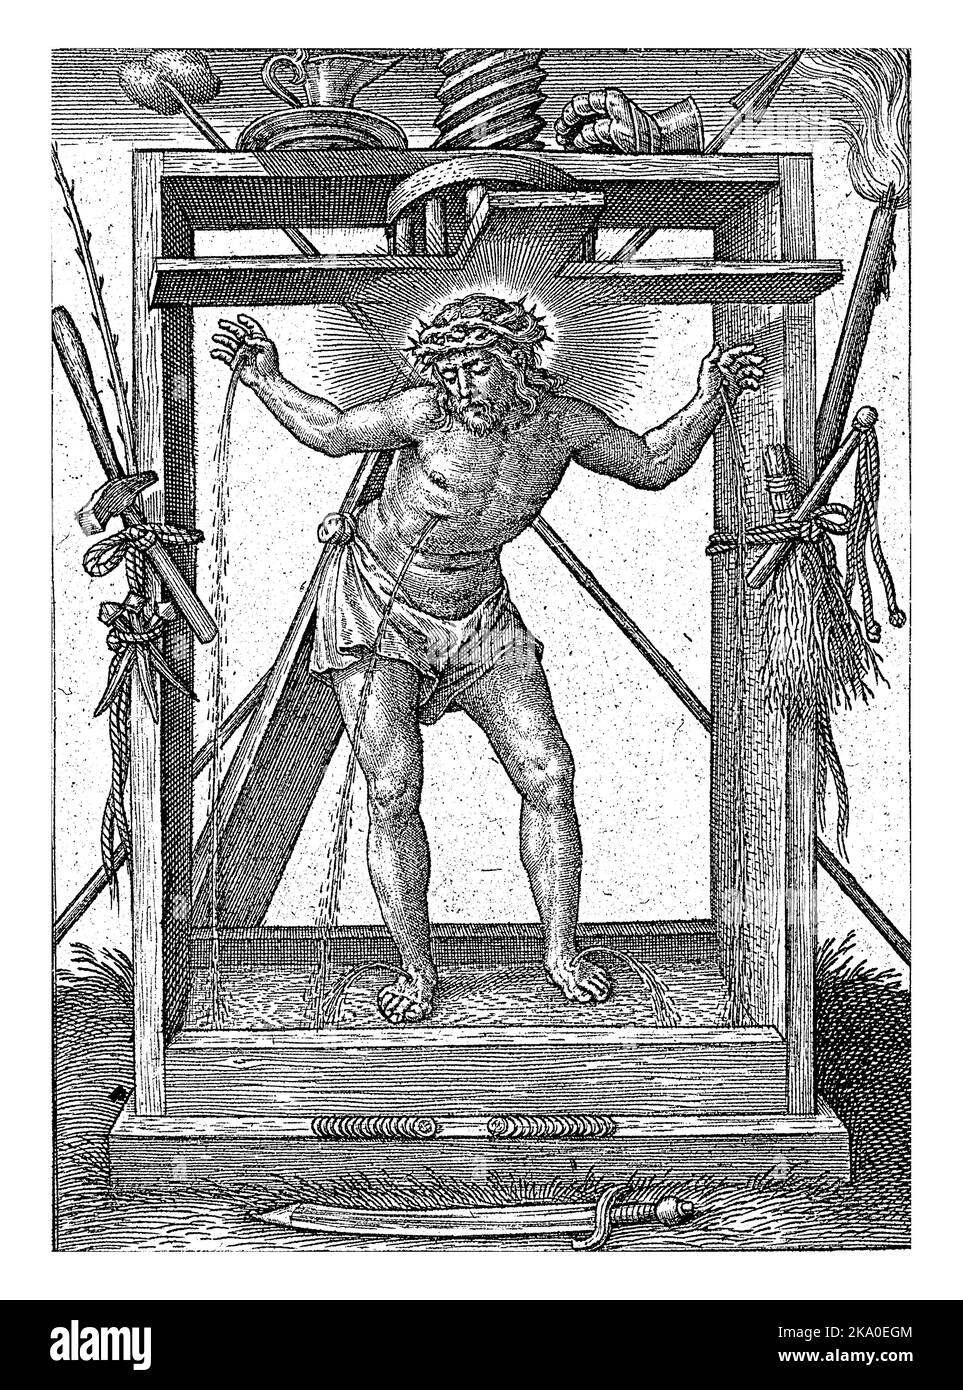 Christ in the winepress, Hieronymus Wierix, 1563 - before 1619 Christ is stooped under a winepress, with the cross on his back. Blood flows from his c Stock Photo